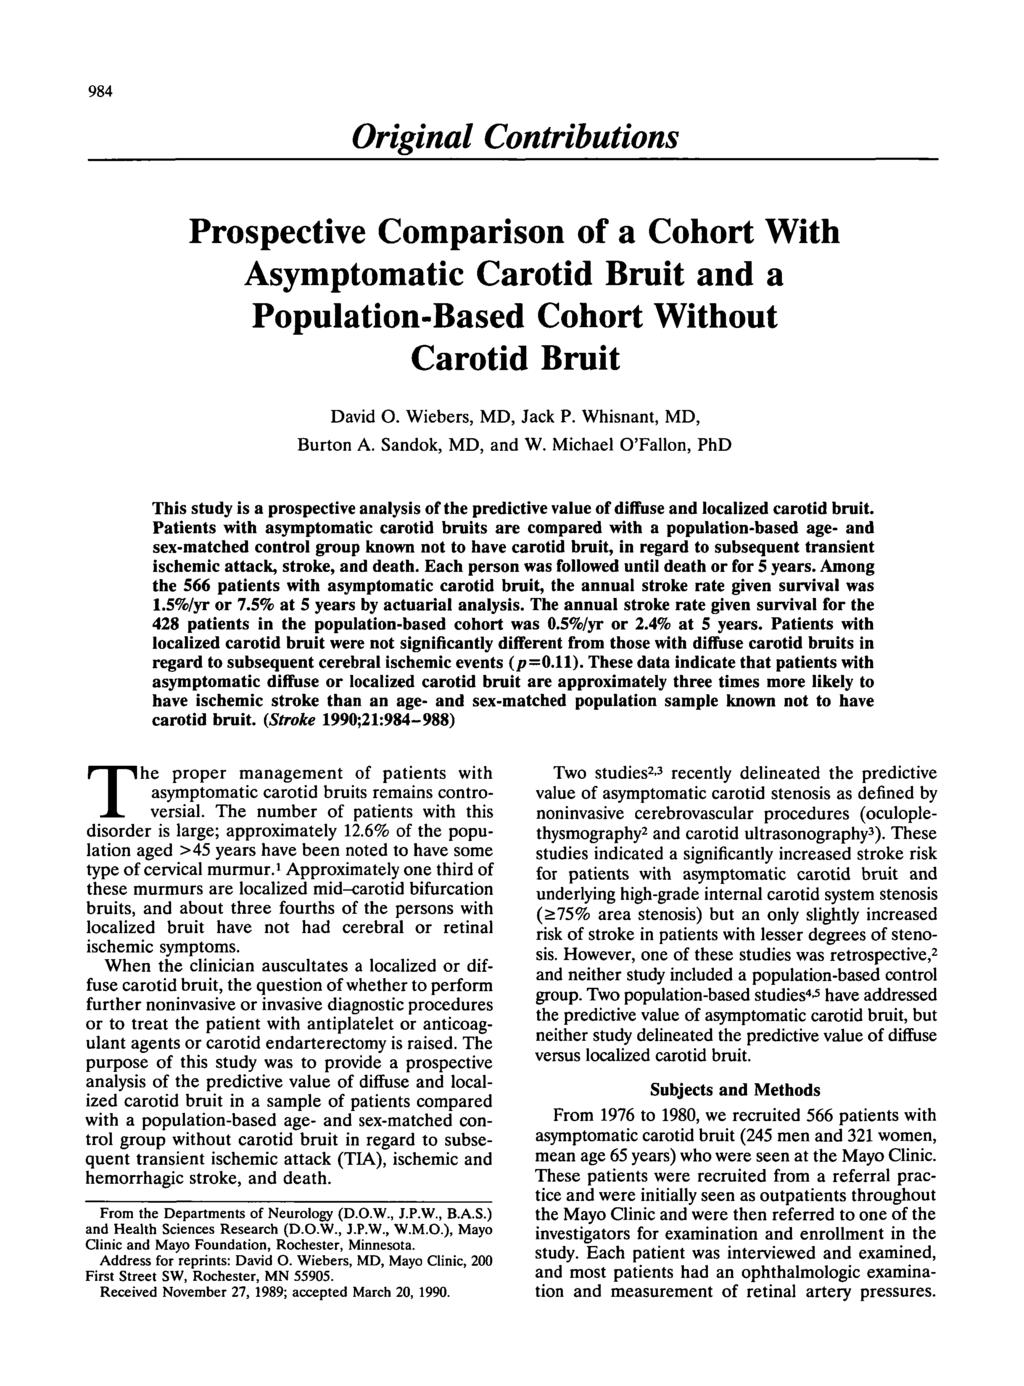 98 Original Contributions Prospective Comparison of a Cohort With Carotid Bruit and a Population-Based Cohort Without Carotid Bruit David O. Wiebers, MD, Jack P. Whisnant, MD, Burton A.